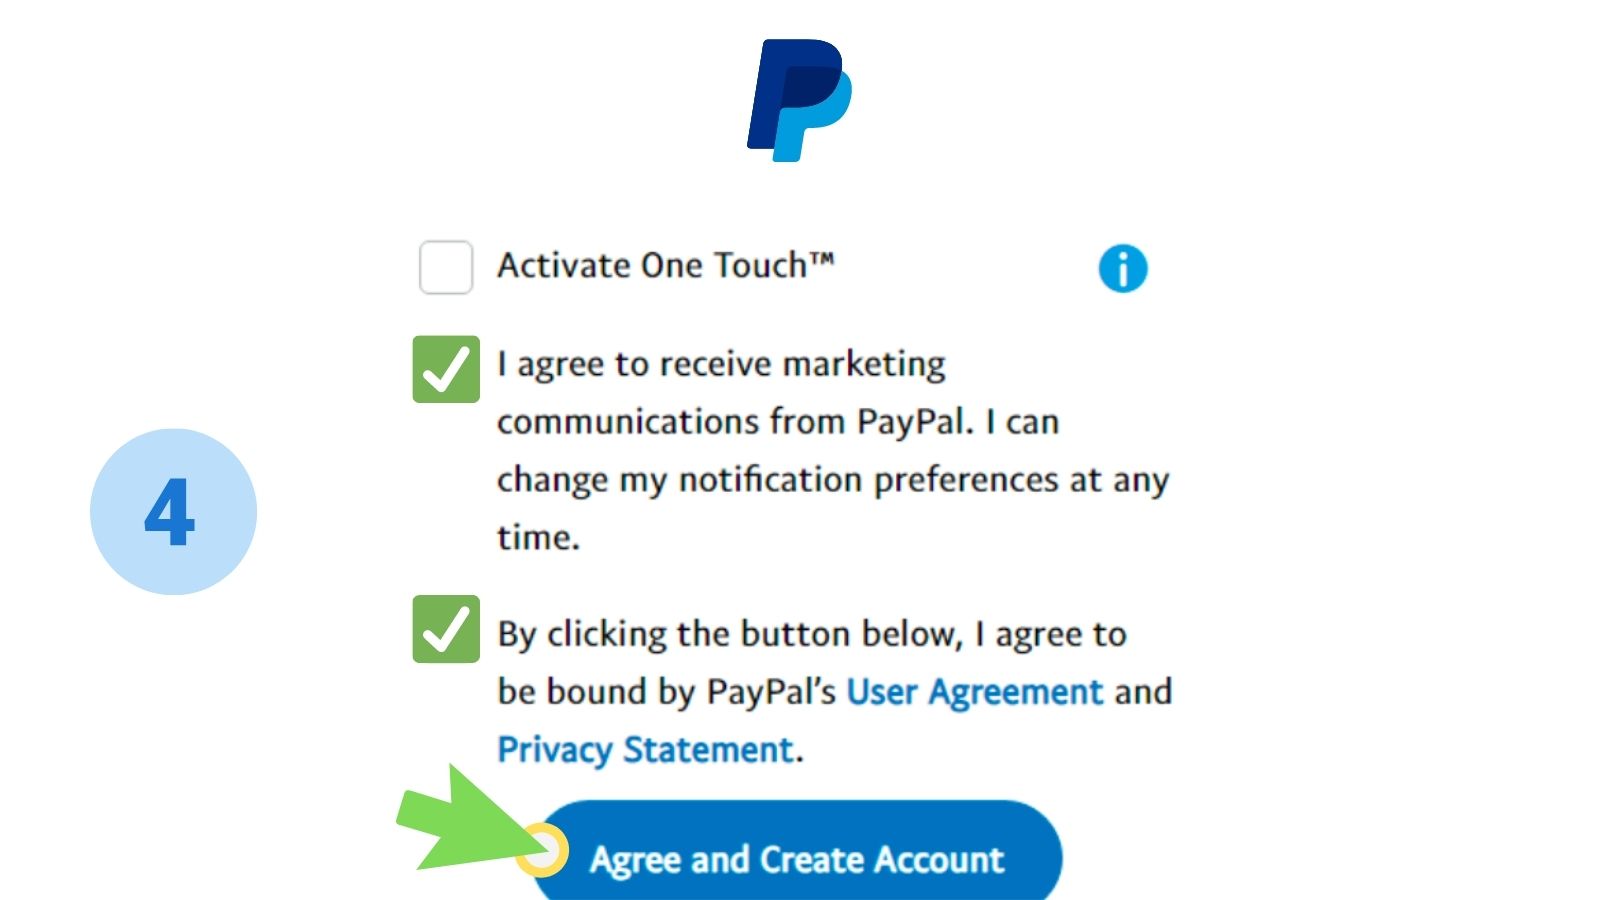 paypal step 4 activate one touch